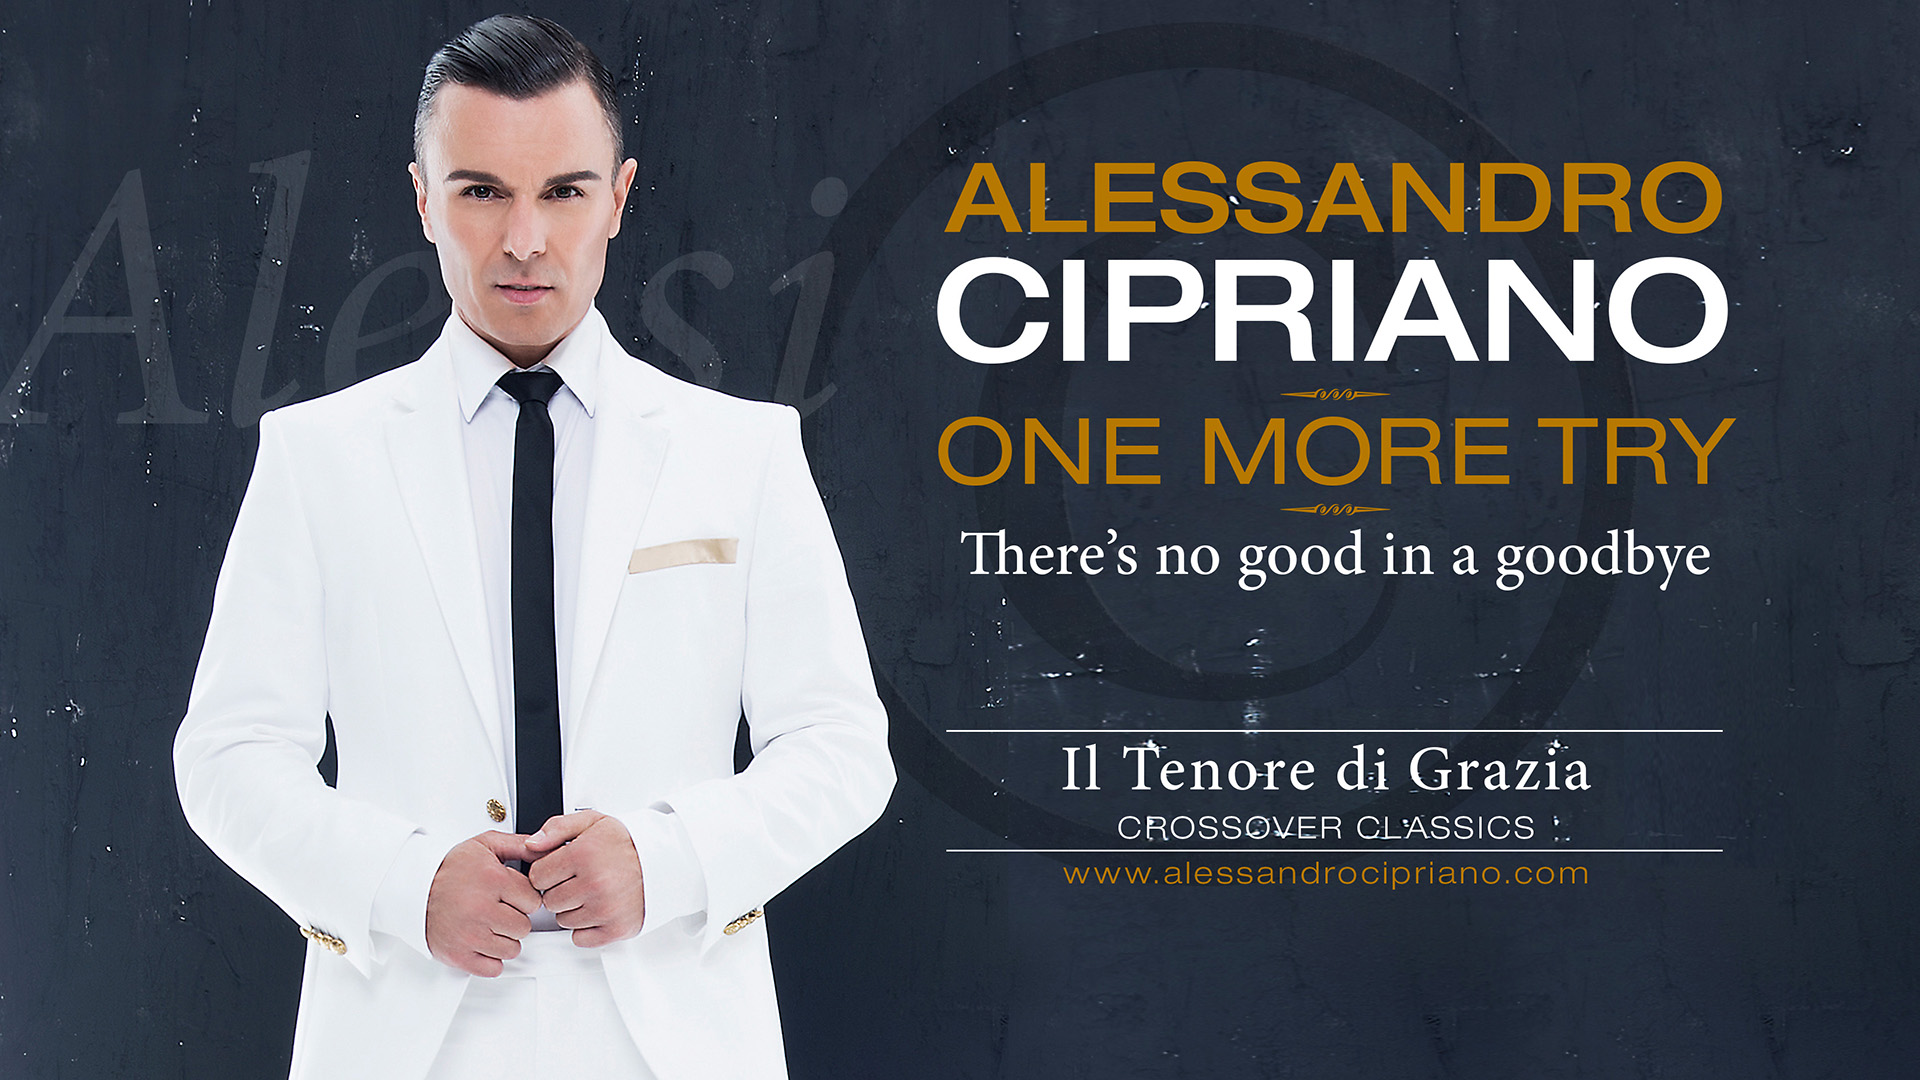 One More Try, Text, Alessandro Cipriano